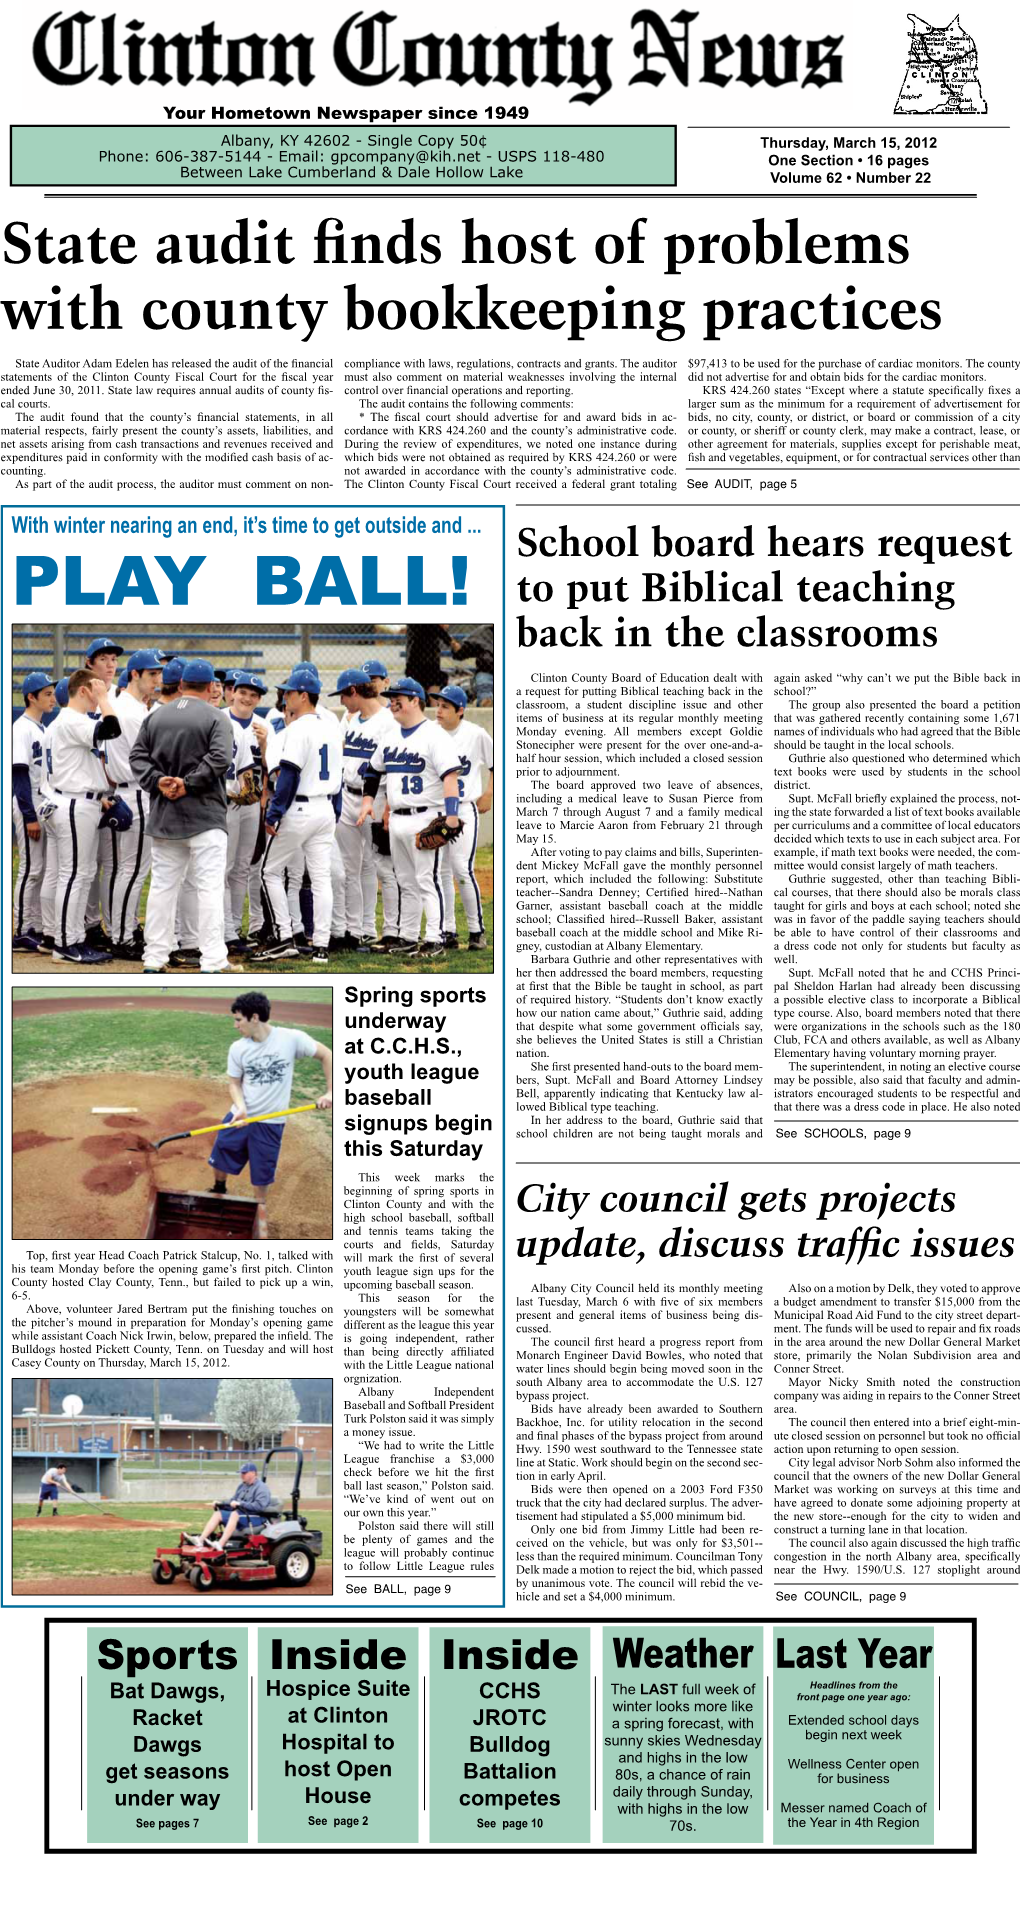 PLAY BALL! to Put Biblical Teaching Back in the Classrooms